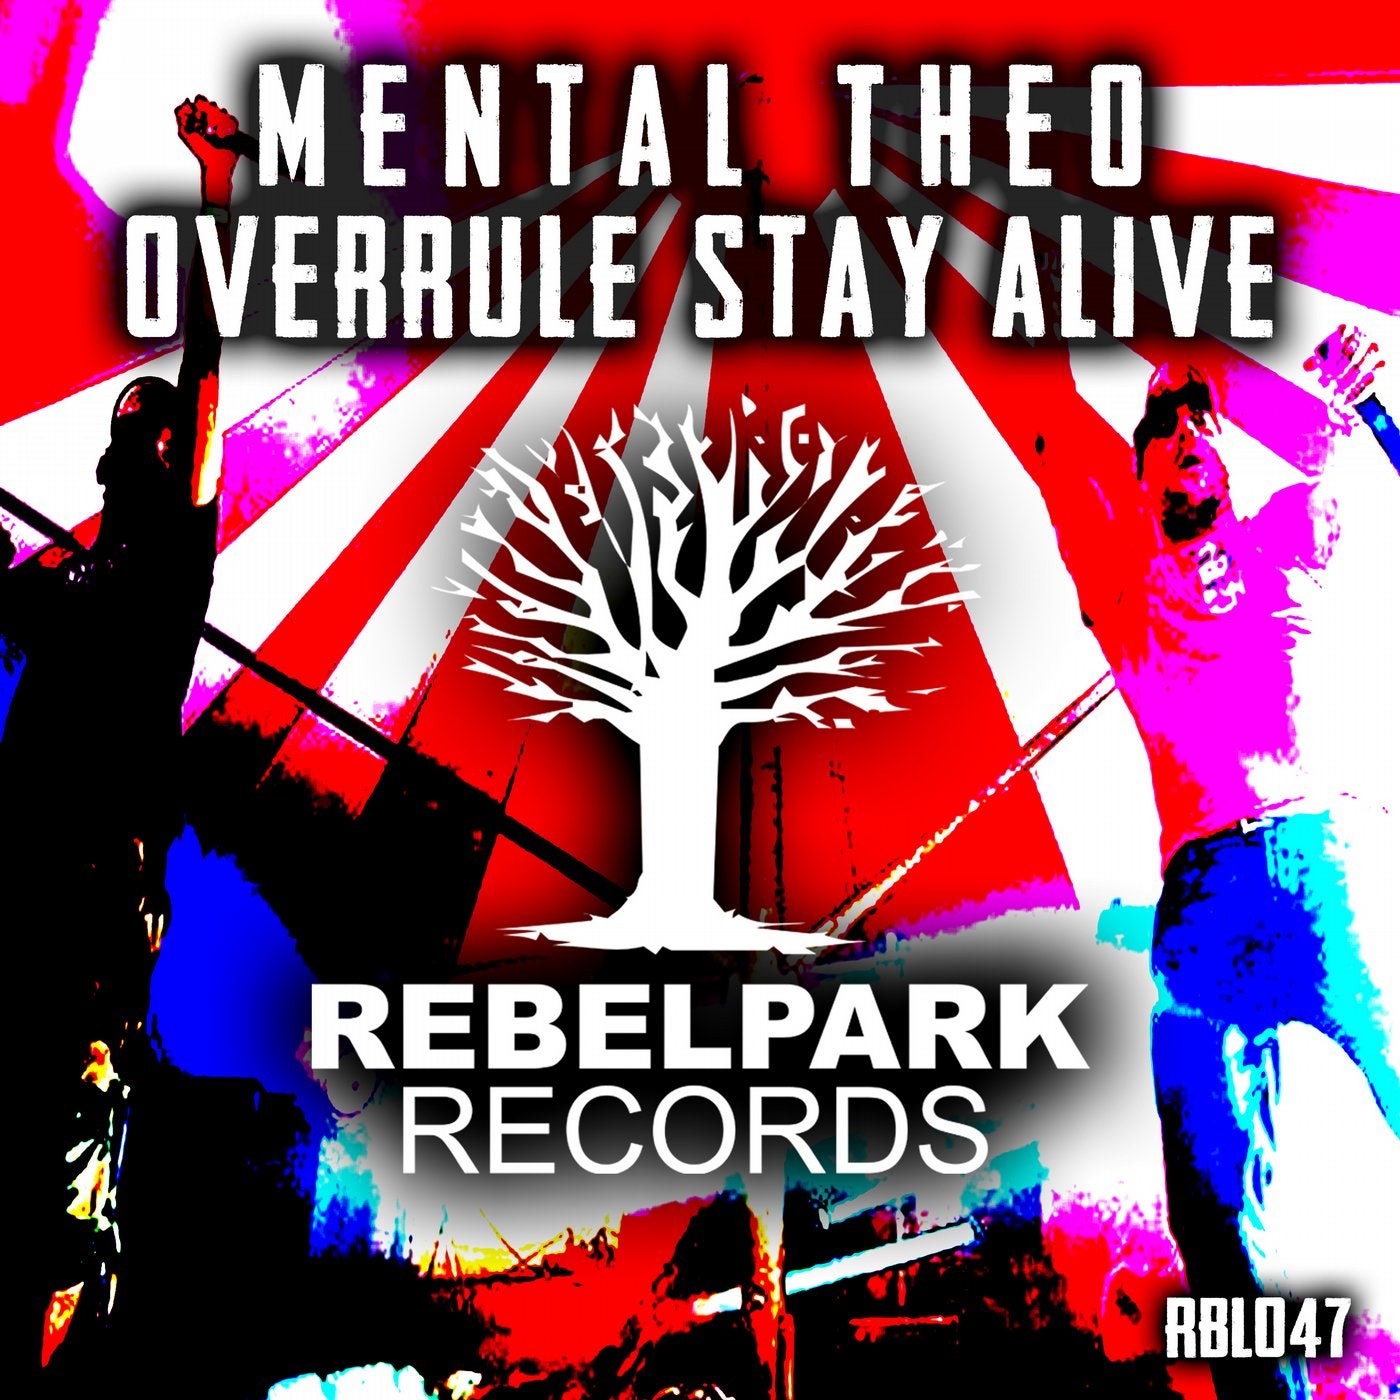 Overrule Stay Alive